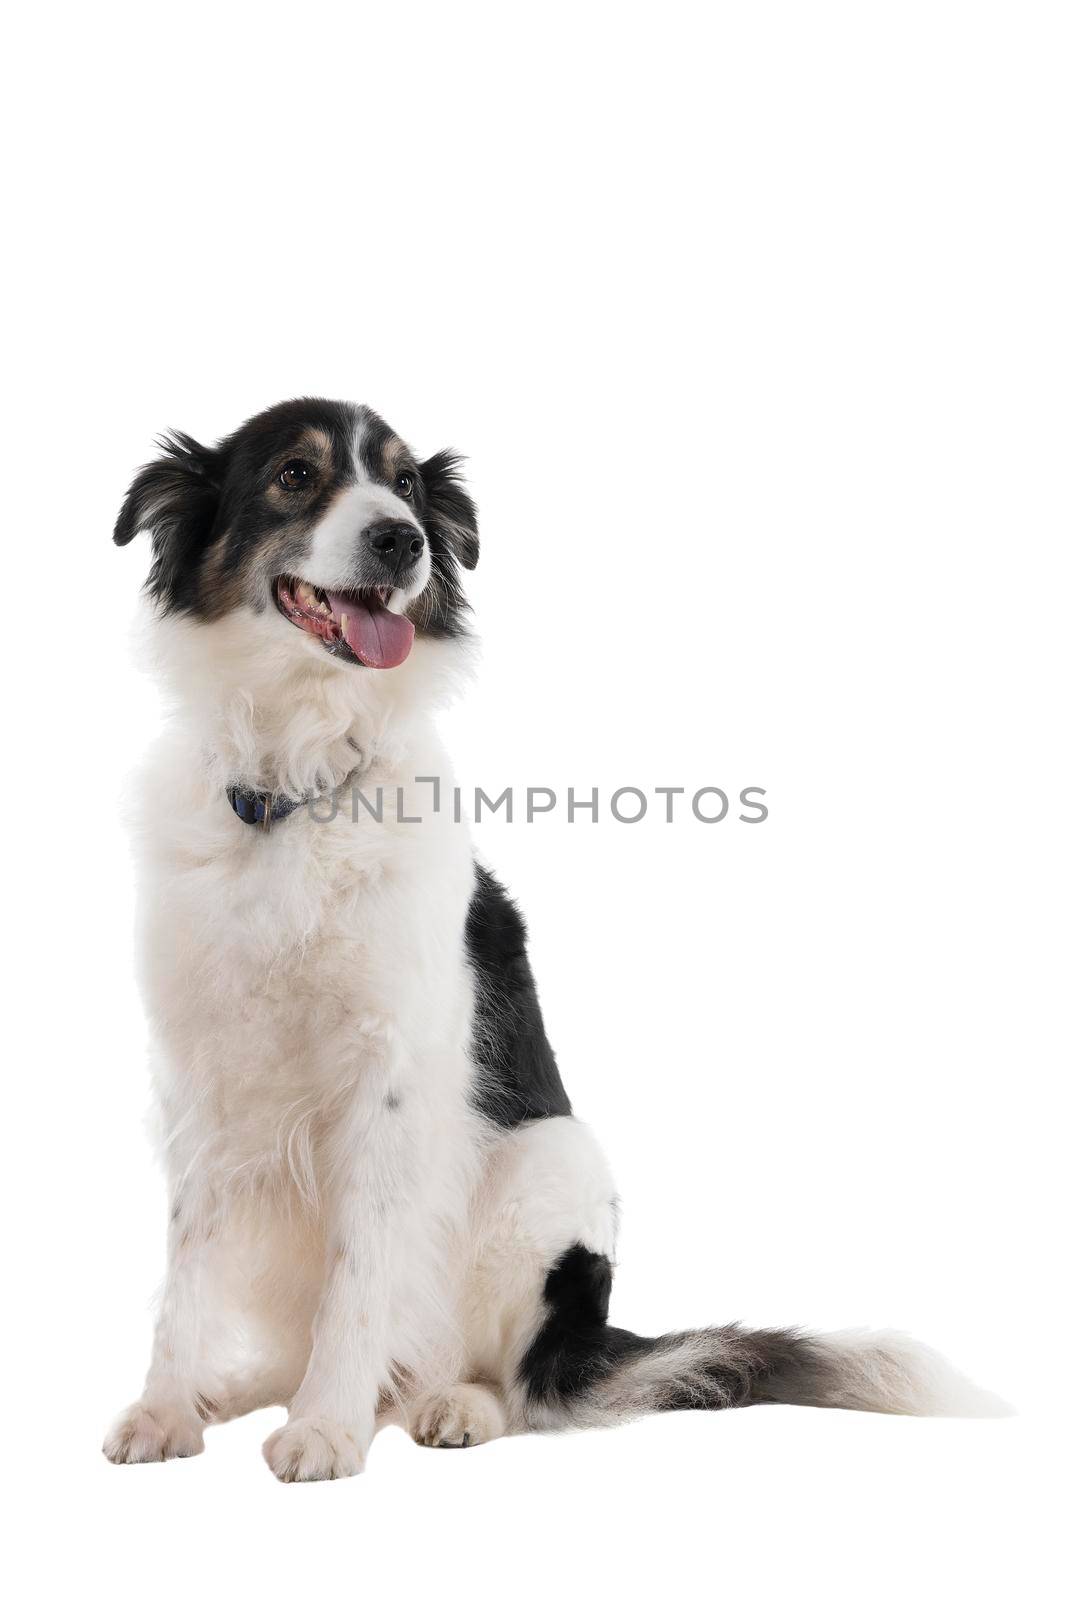 a Black and white Australian Shepherd dog sitting isolated in white background  looking front view by LeoniekvanderVliet